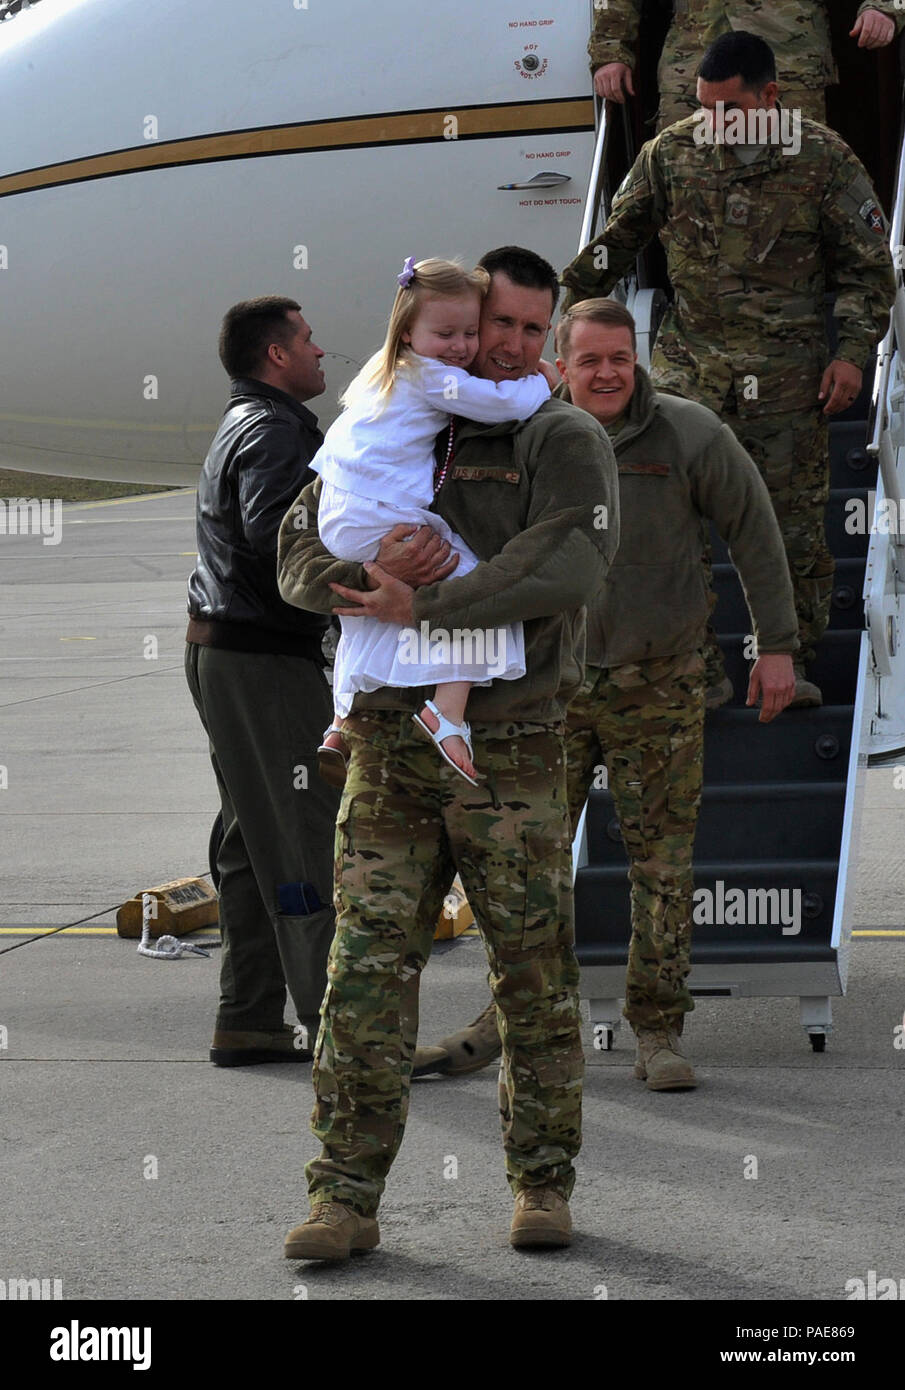 Airmen reunite with their families after returning from a deployment March 15, 2016, at Ramstein Air Base, Germany. The 76th Airlift Squadron Airmen aided an important mission by providing executive airlift and aeromedical evacuation. (U.S. Air Force photo/Airman 1st Class Larissa Greatwood) Stock Photo